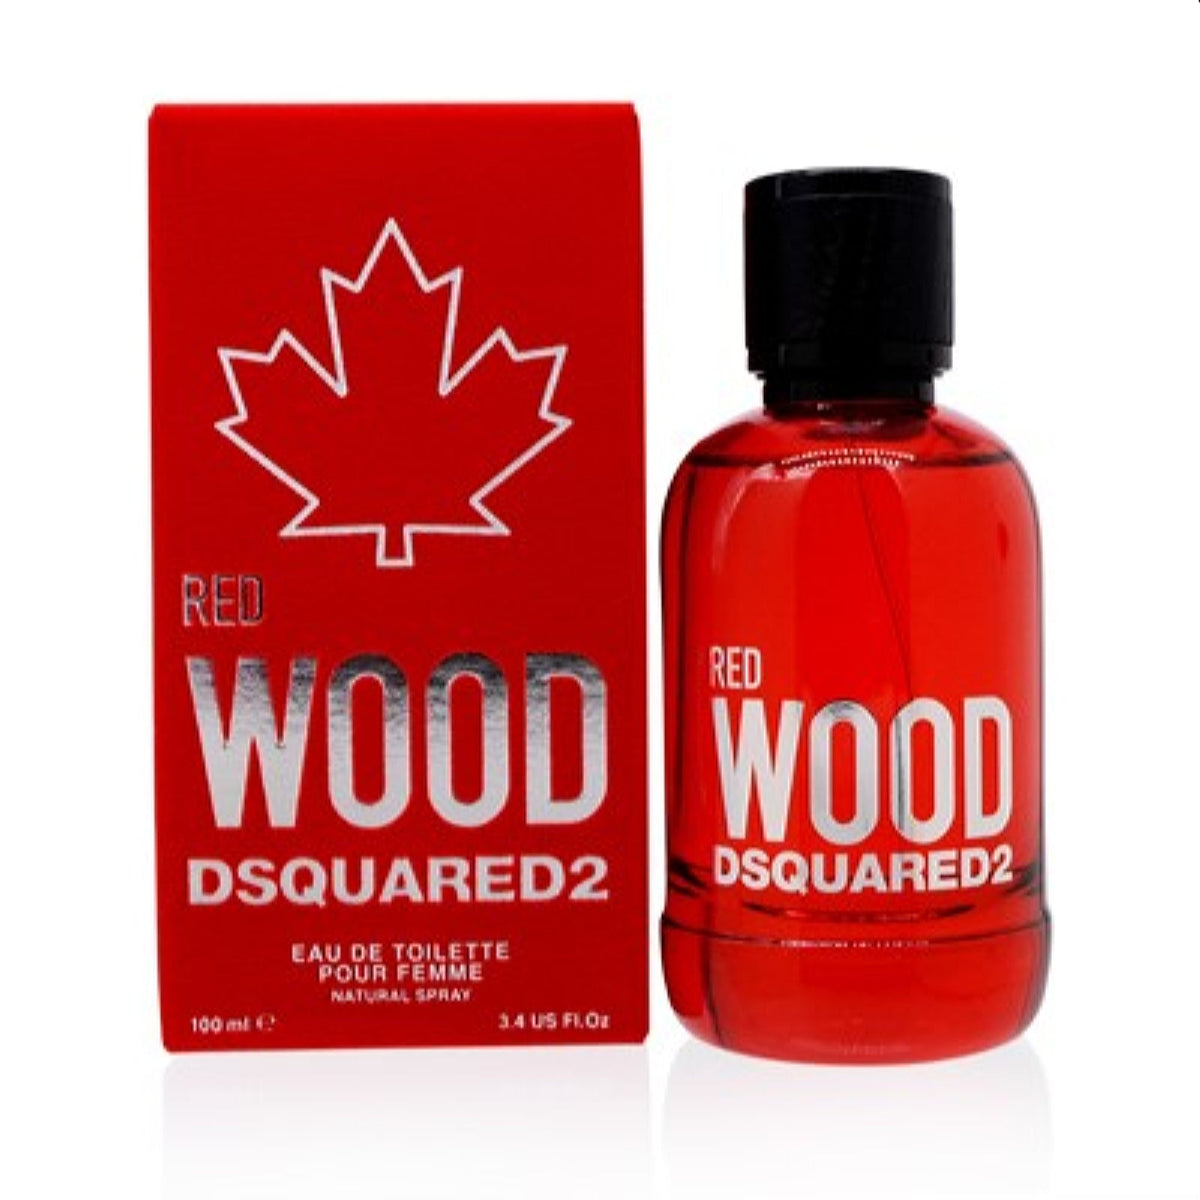 Red Wood Dsquared2 Edt Spray 3.4 Oz (100 Ml) For Women  5C32